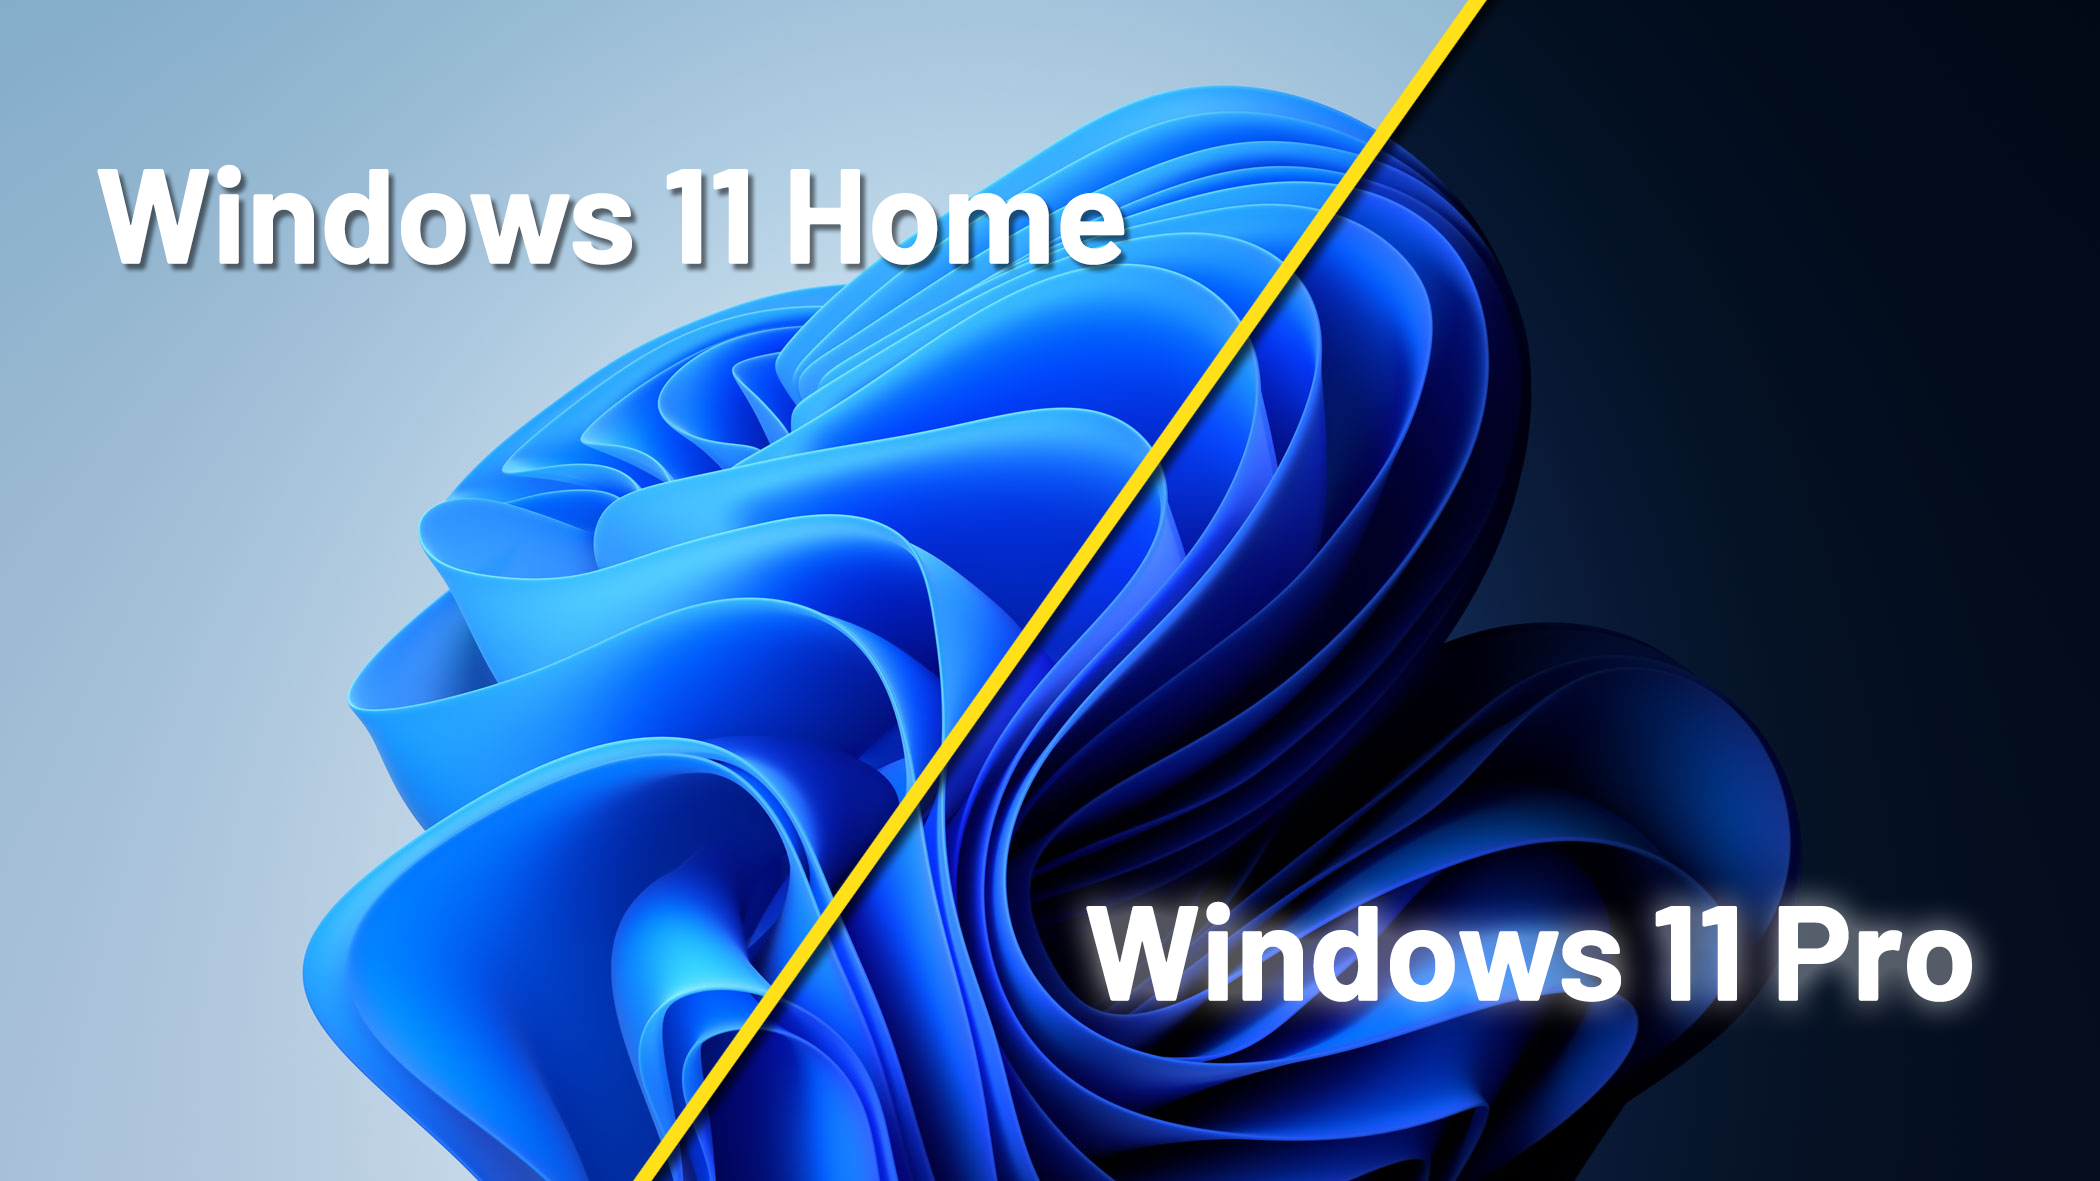 Windows 10 Pro vs Home: What's the difference?